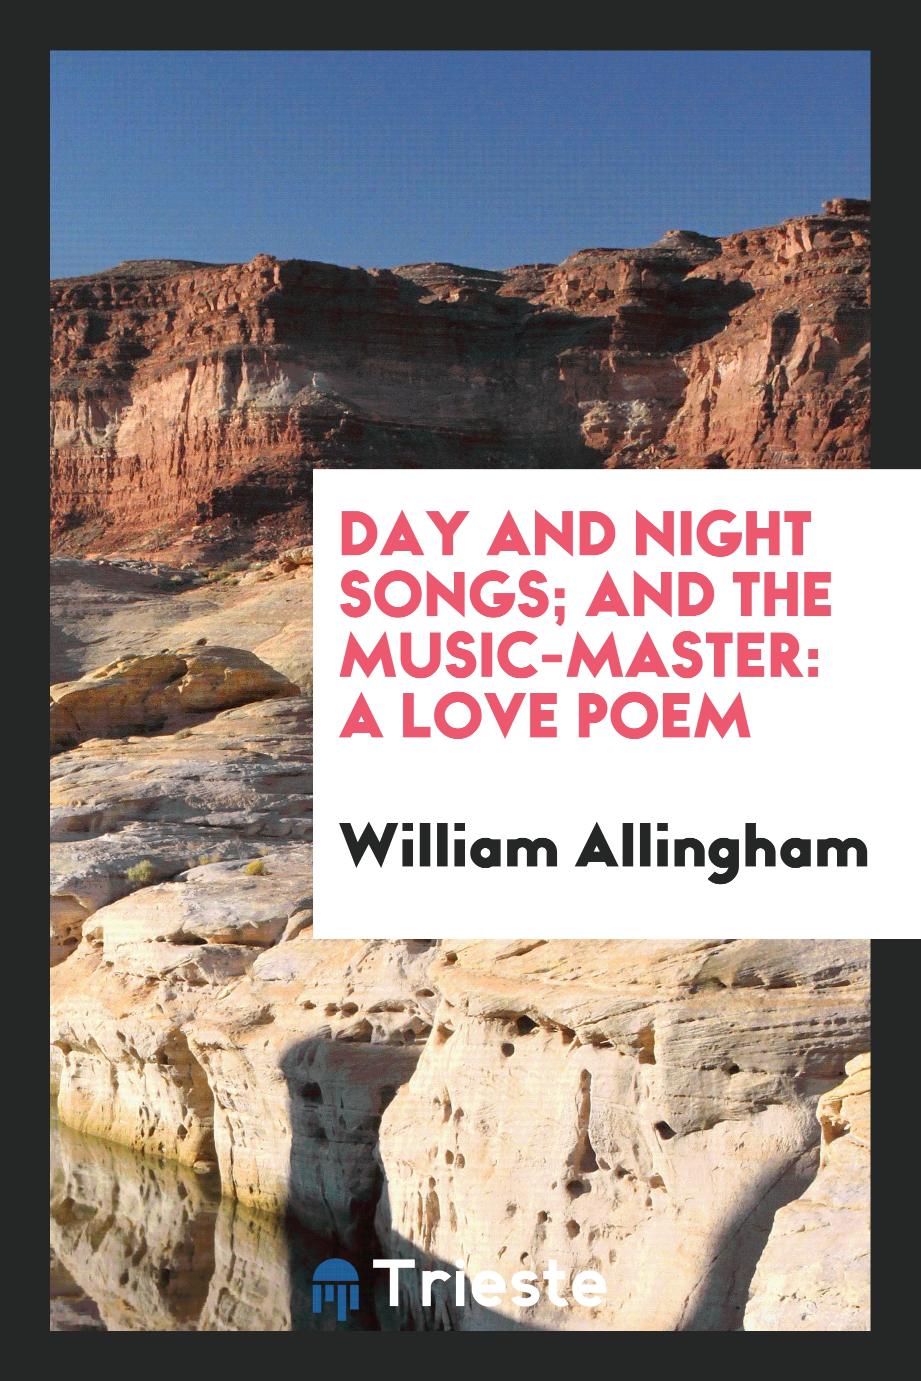 Day and night songs; and The music-master: a love poem